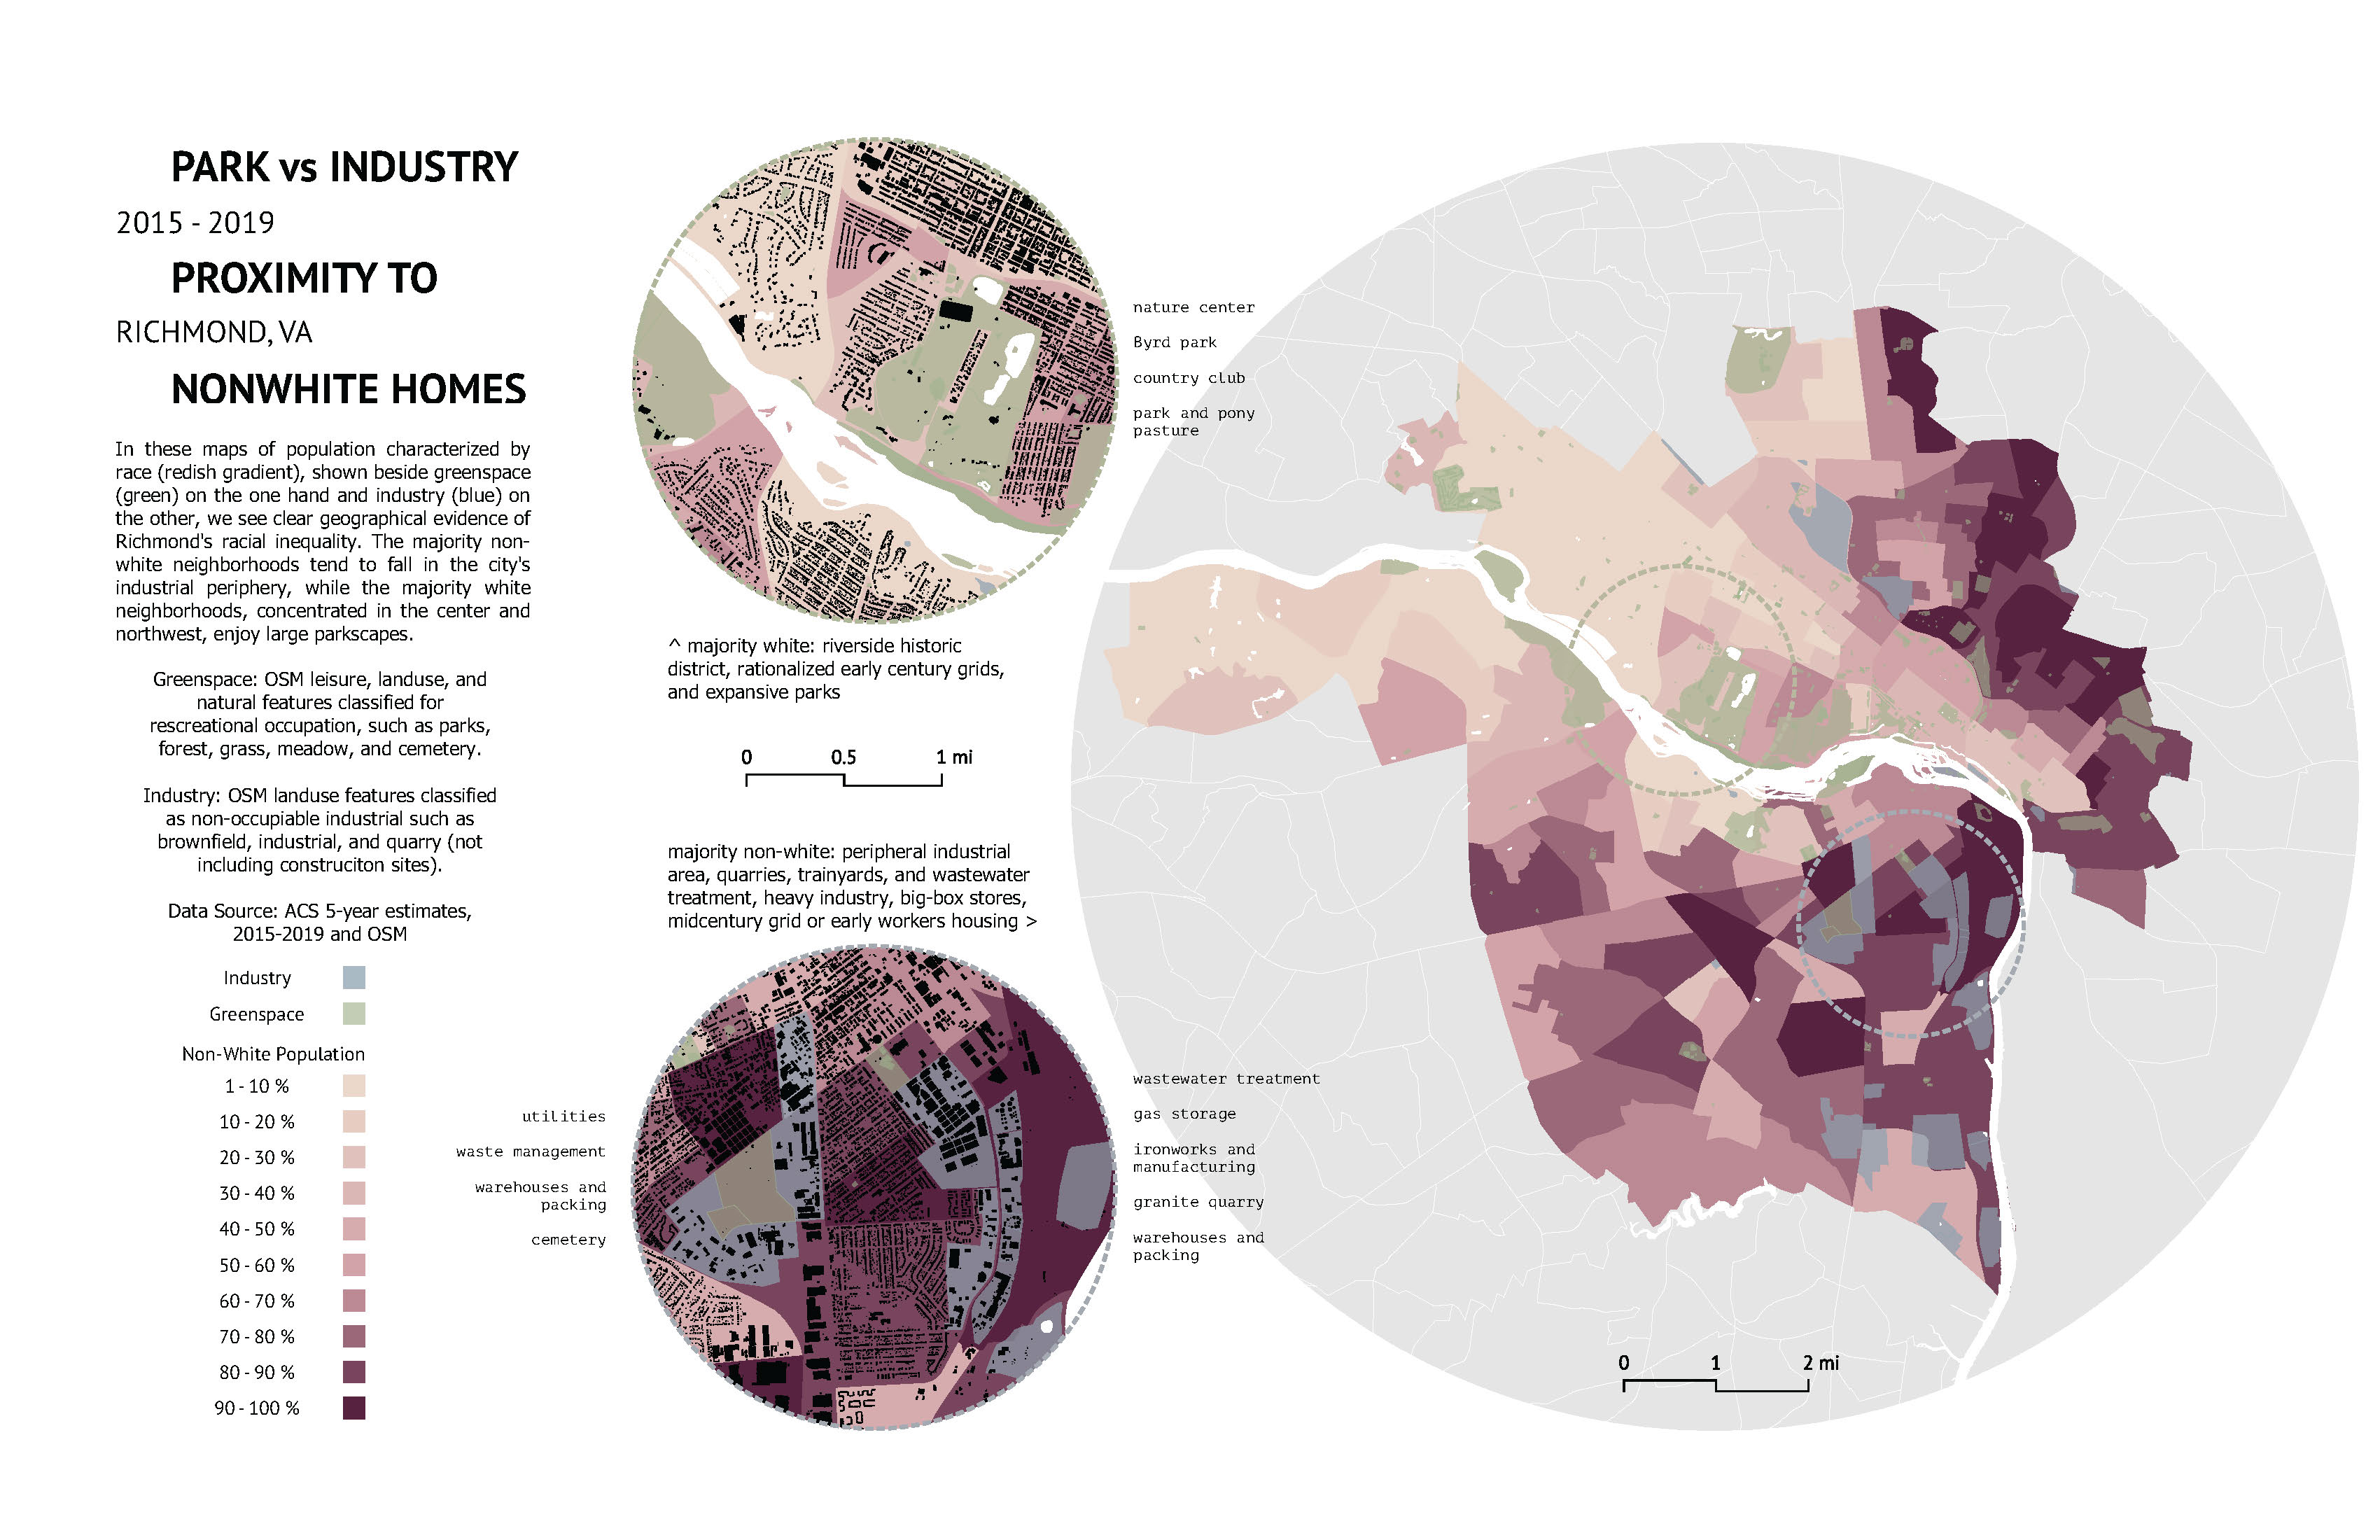 An infographic indicates the proximity of industry to non-White homes